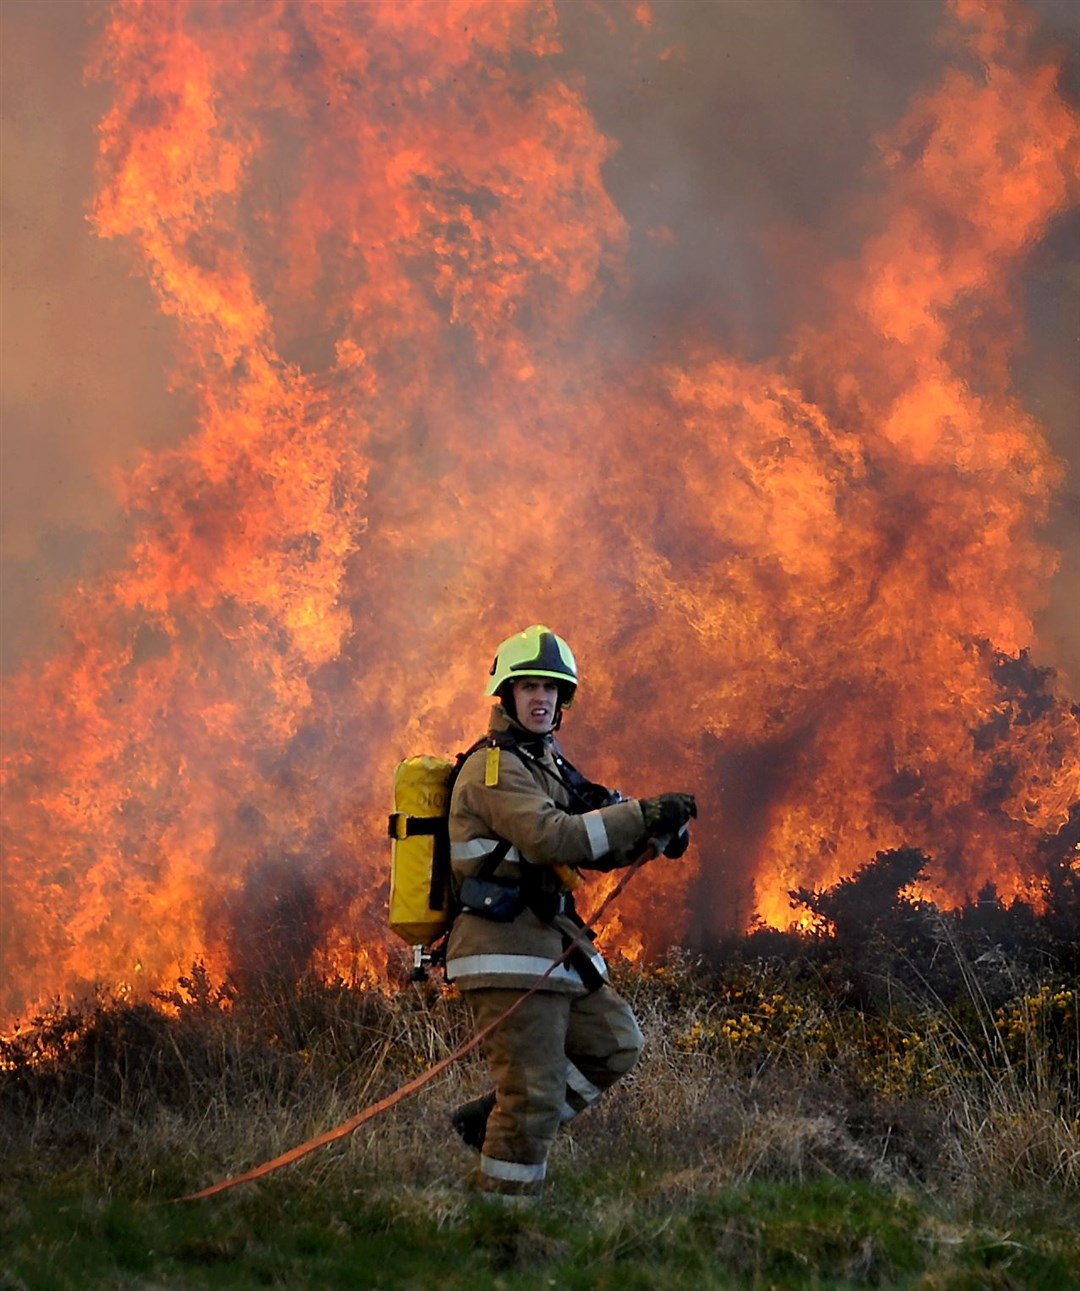 A firefighter tackles a wildfire.